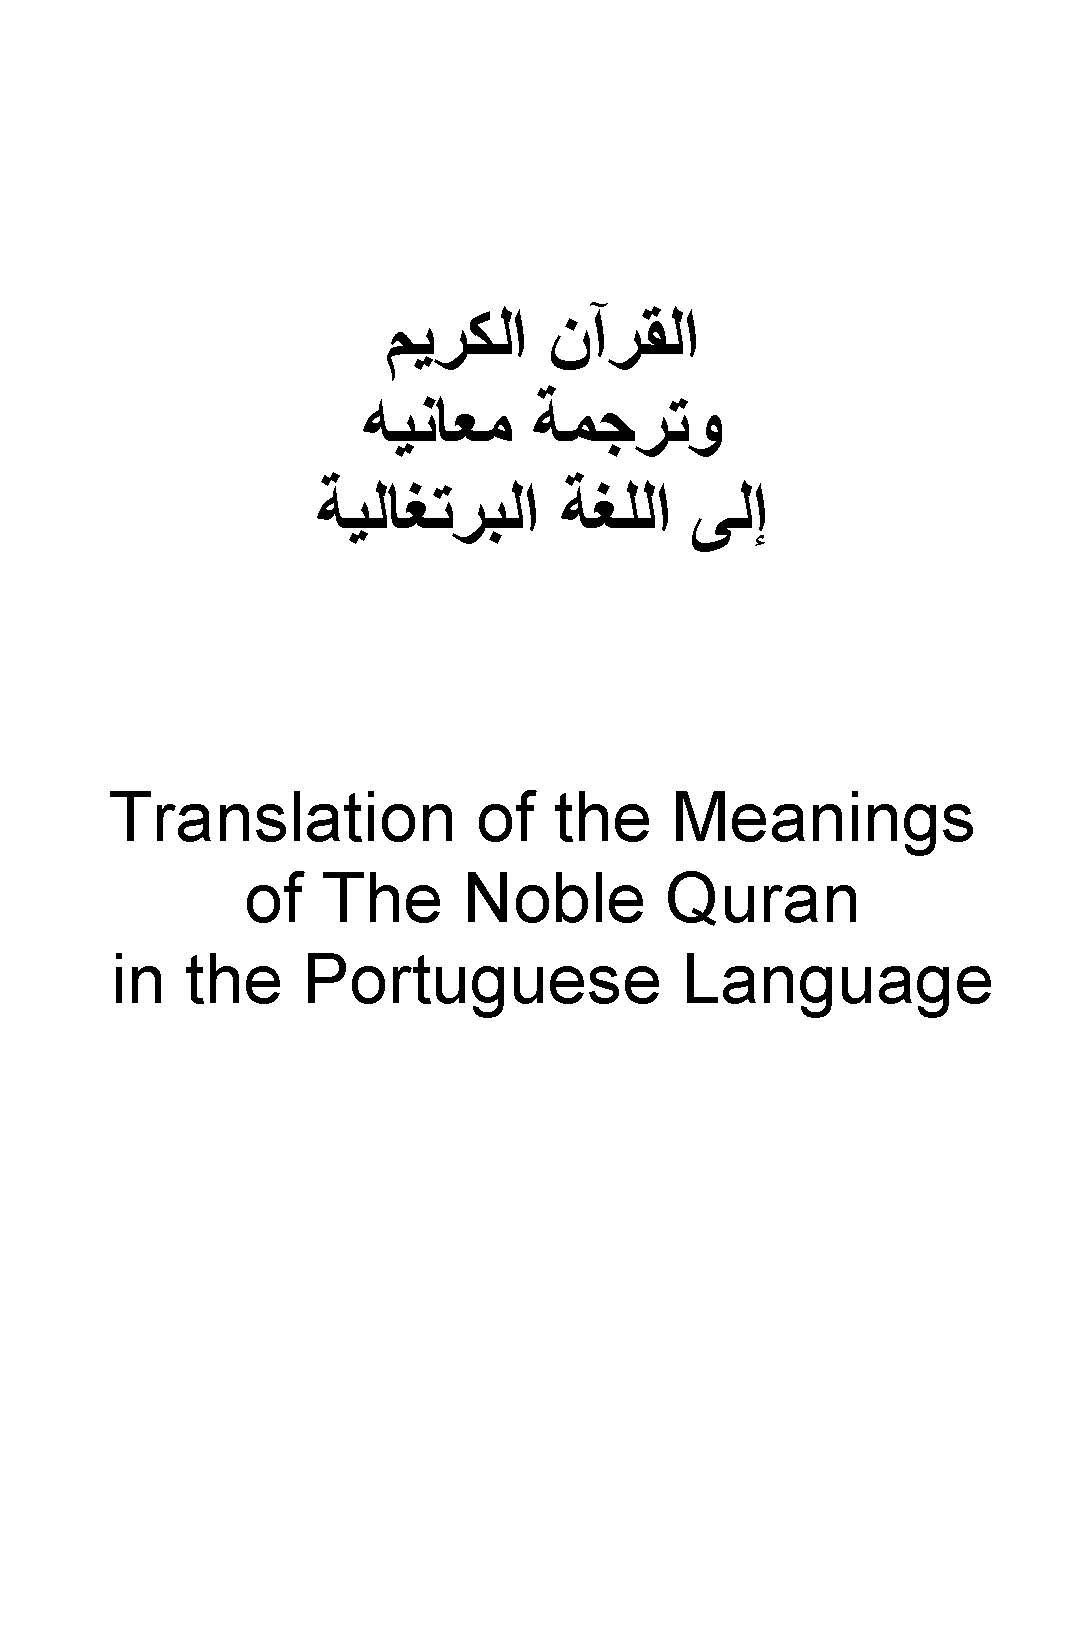 Portuguese translation of the meanings of quran